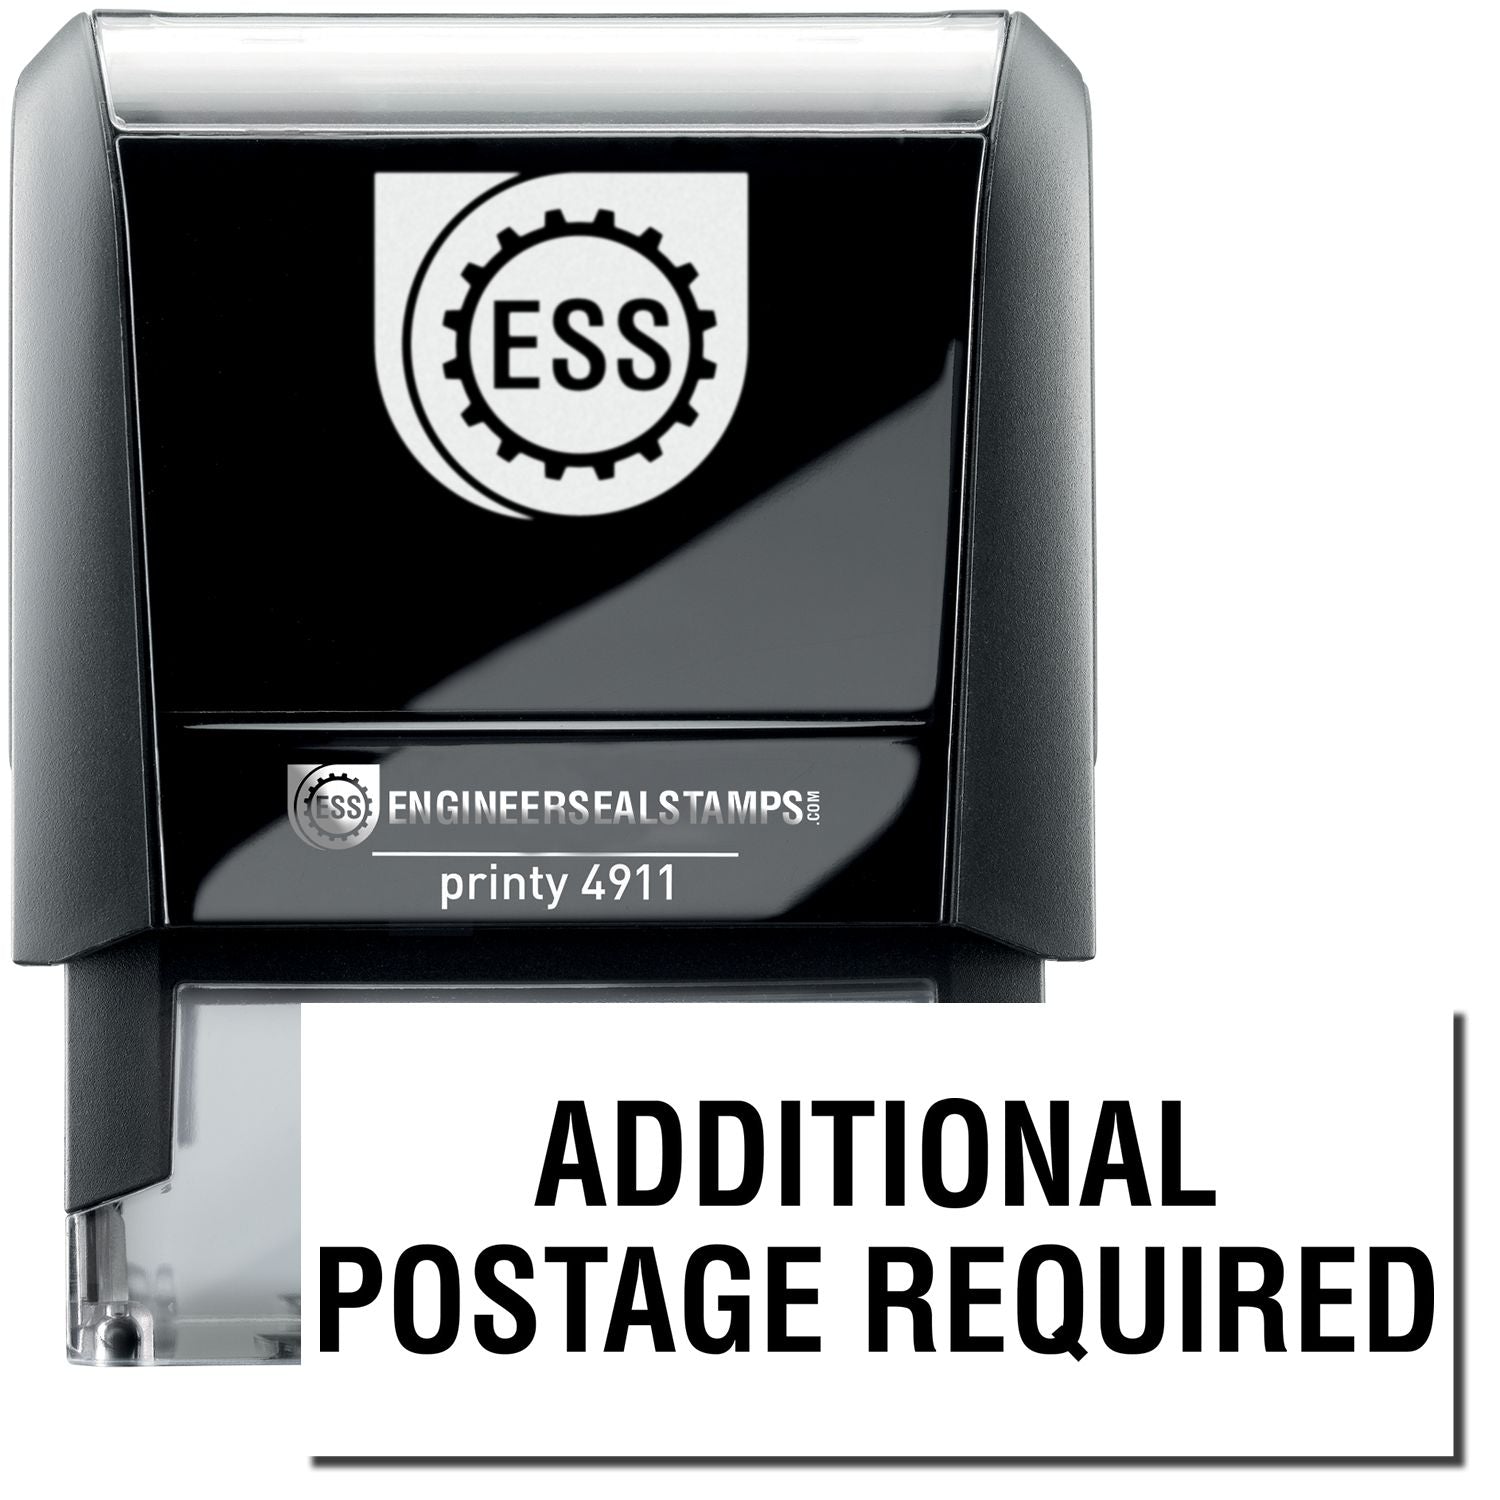 A self-inking stamp with a stamped image showing how the text "ADDITIONAL POSTAGE REQUIRED" is displayed after stamping.